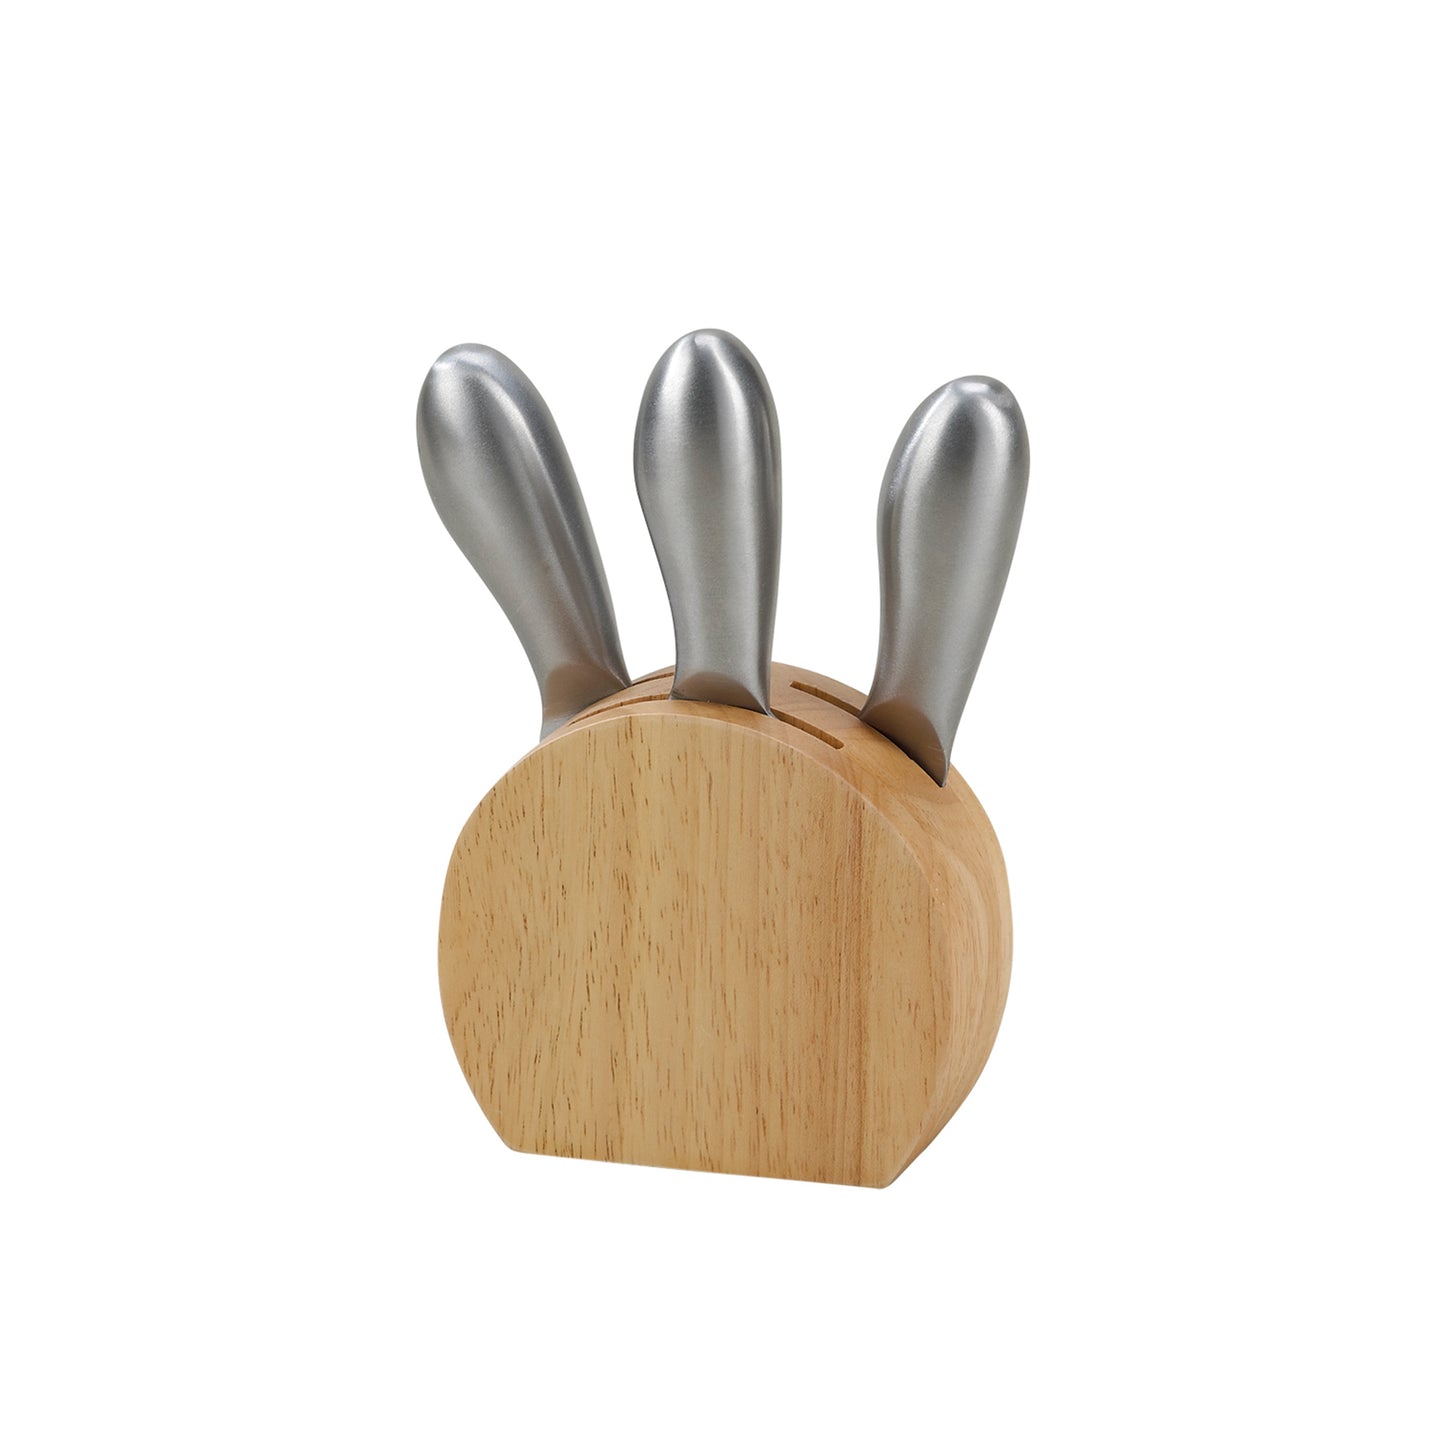 Wood Block with 3 Stainless Steel Cheese Utensils